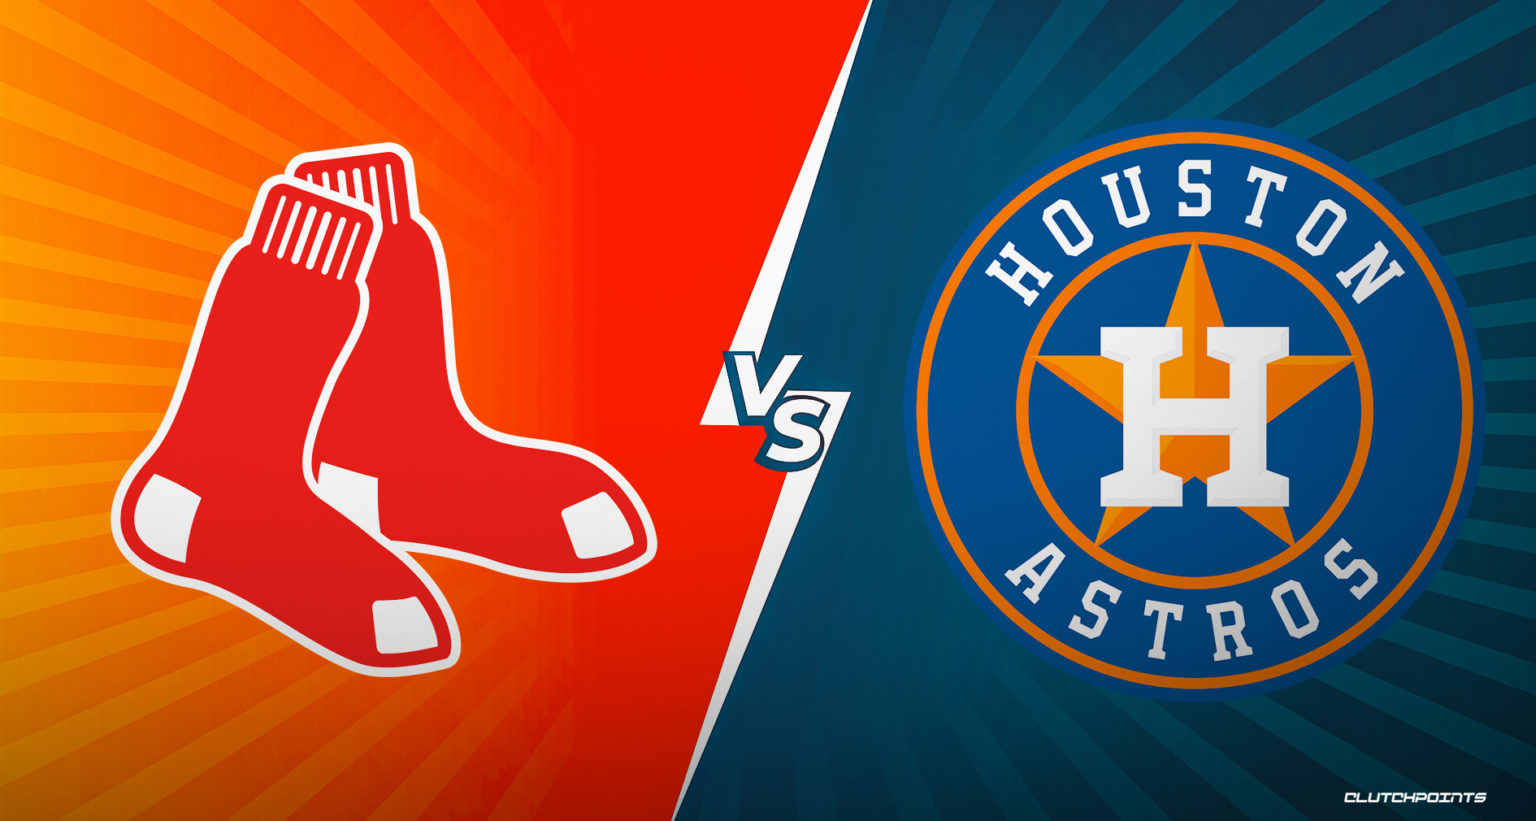 Red Sox Vs Astros - Odds, Predictions, Picks, And More